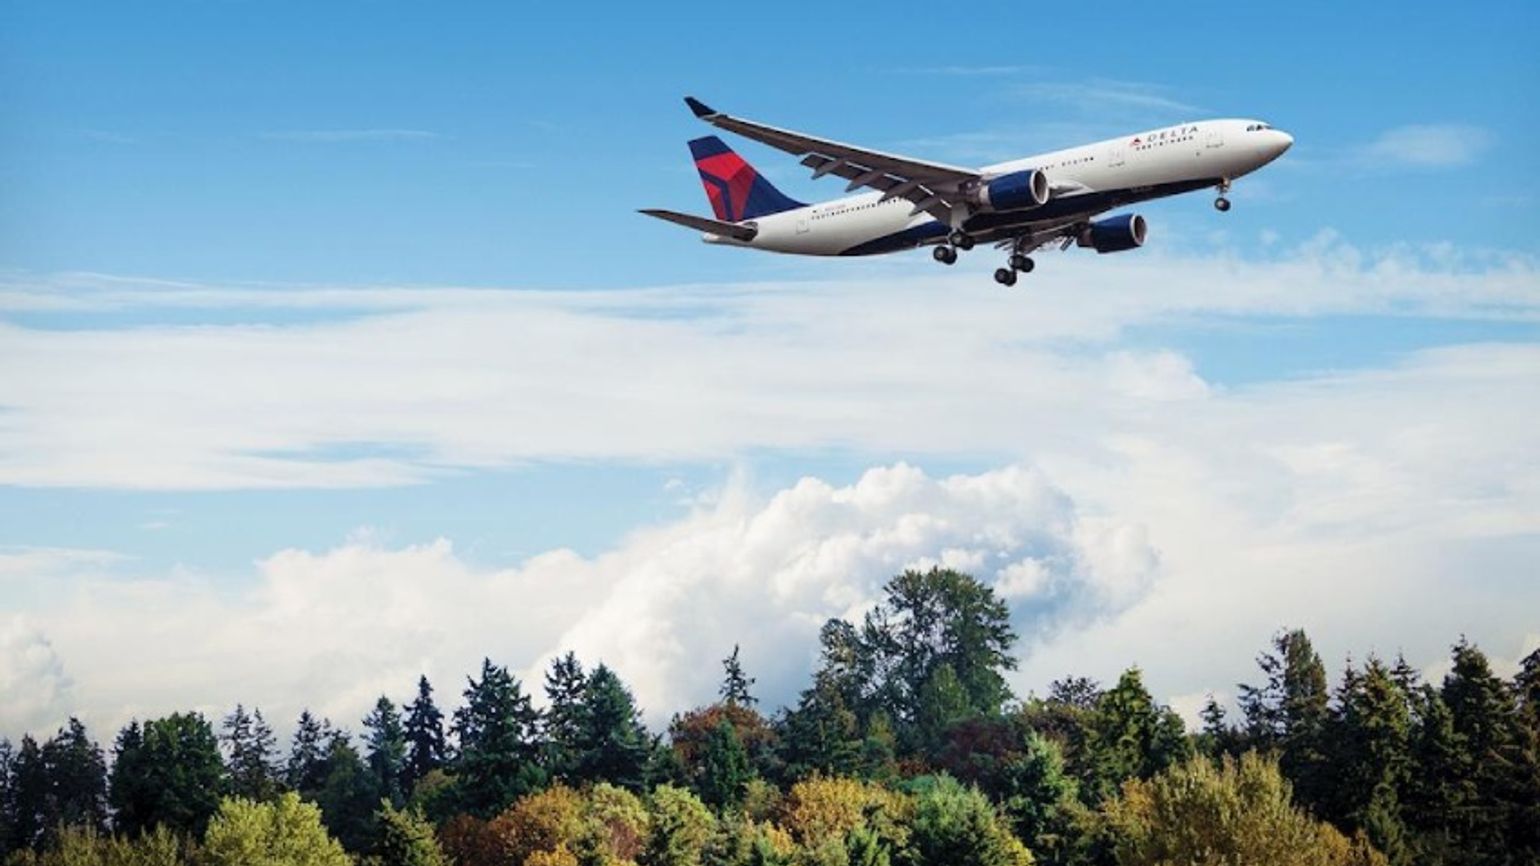 A Delta aircraft flying over trees